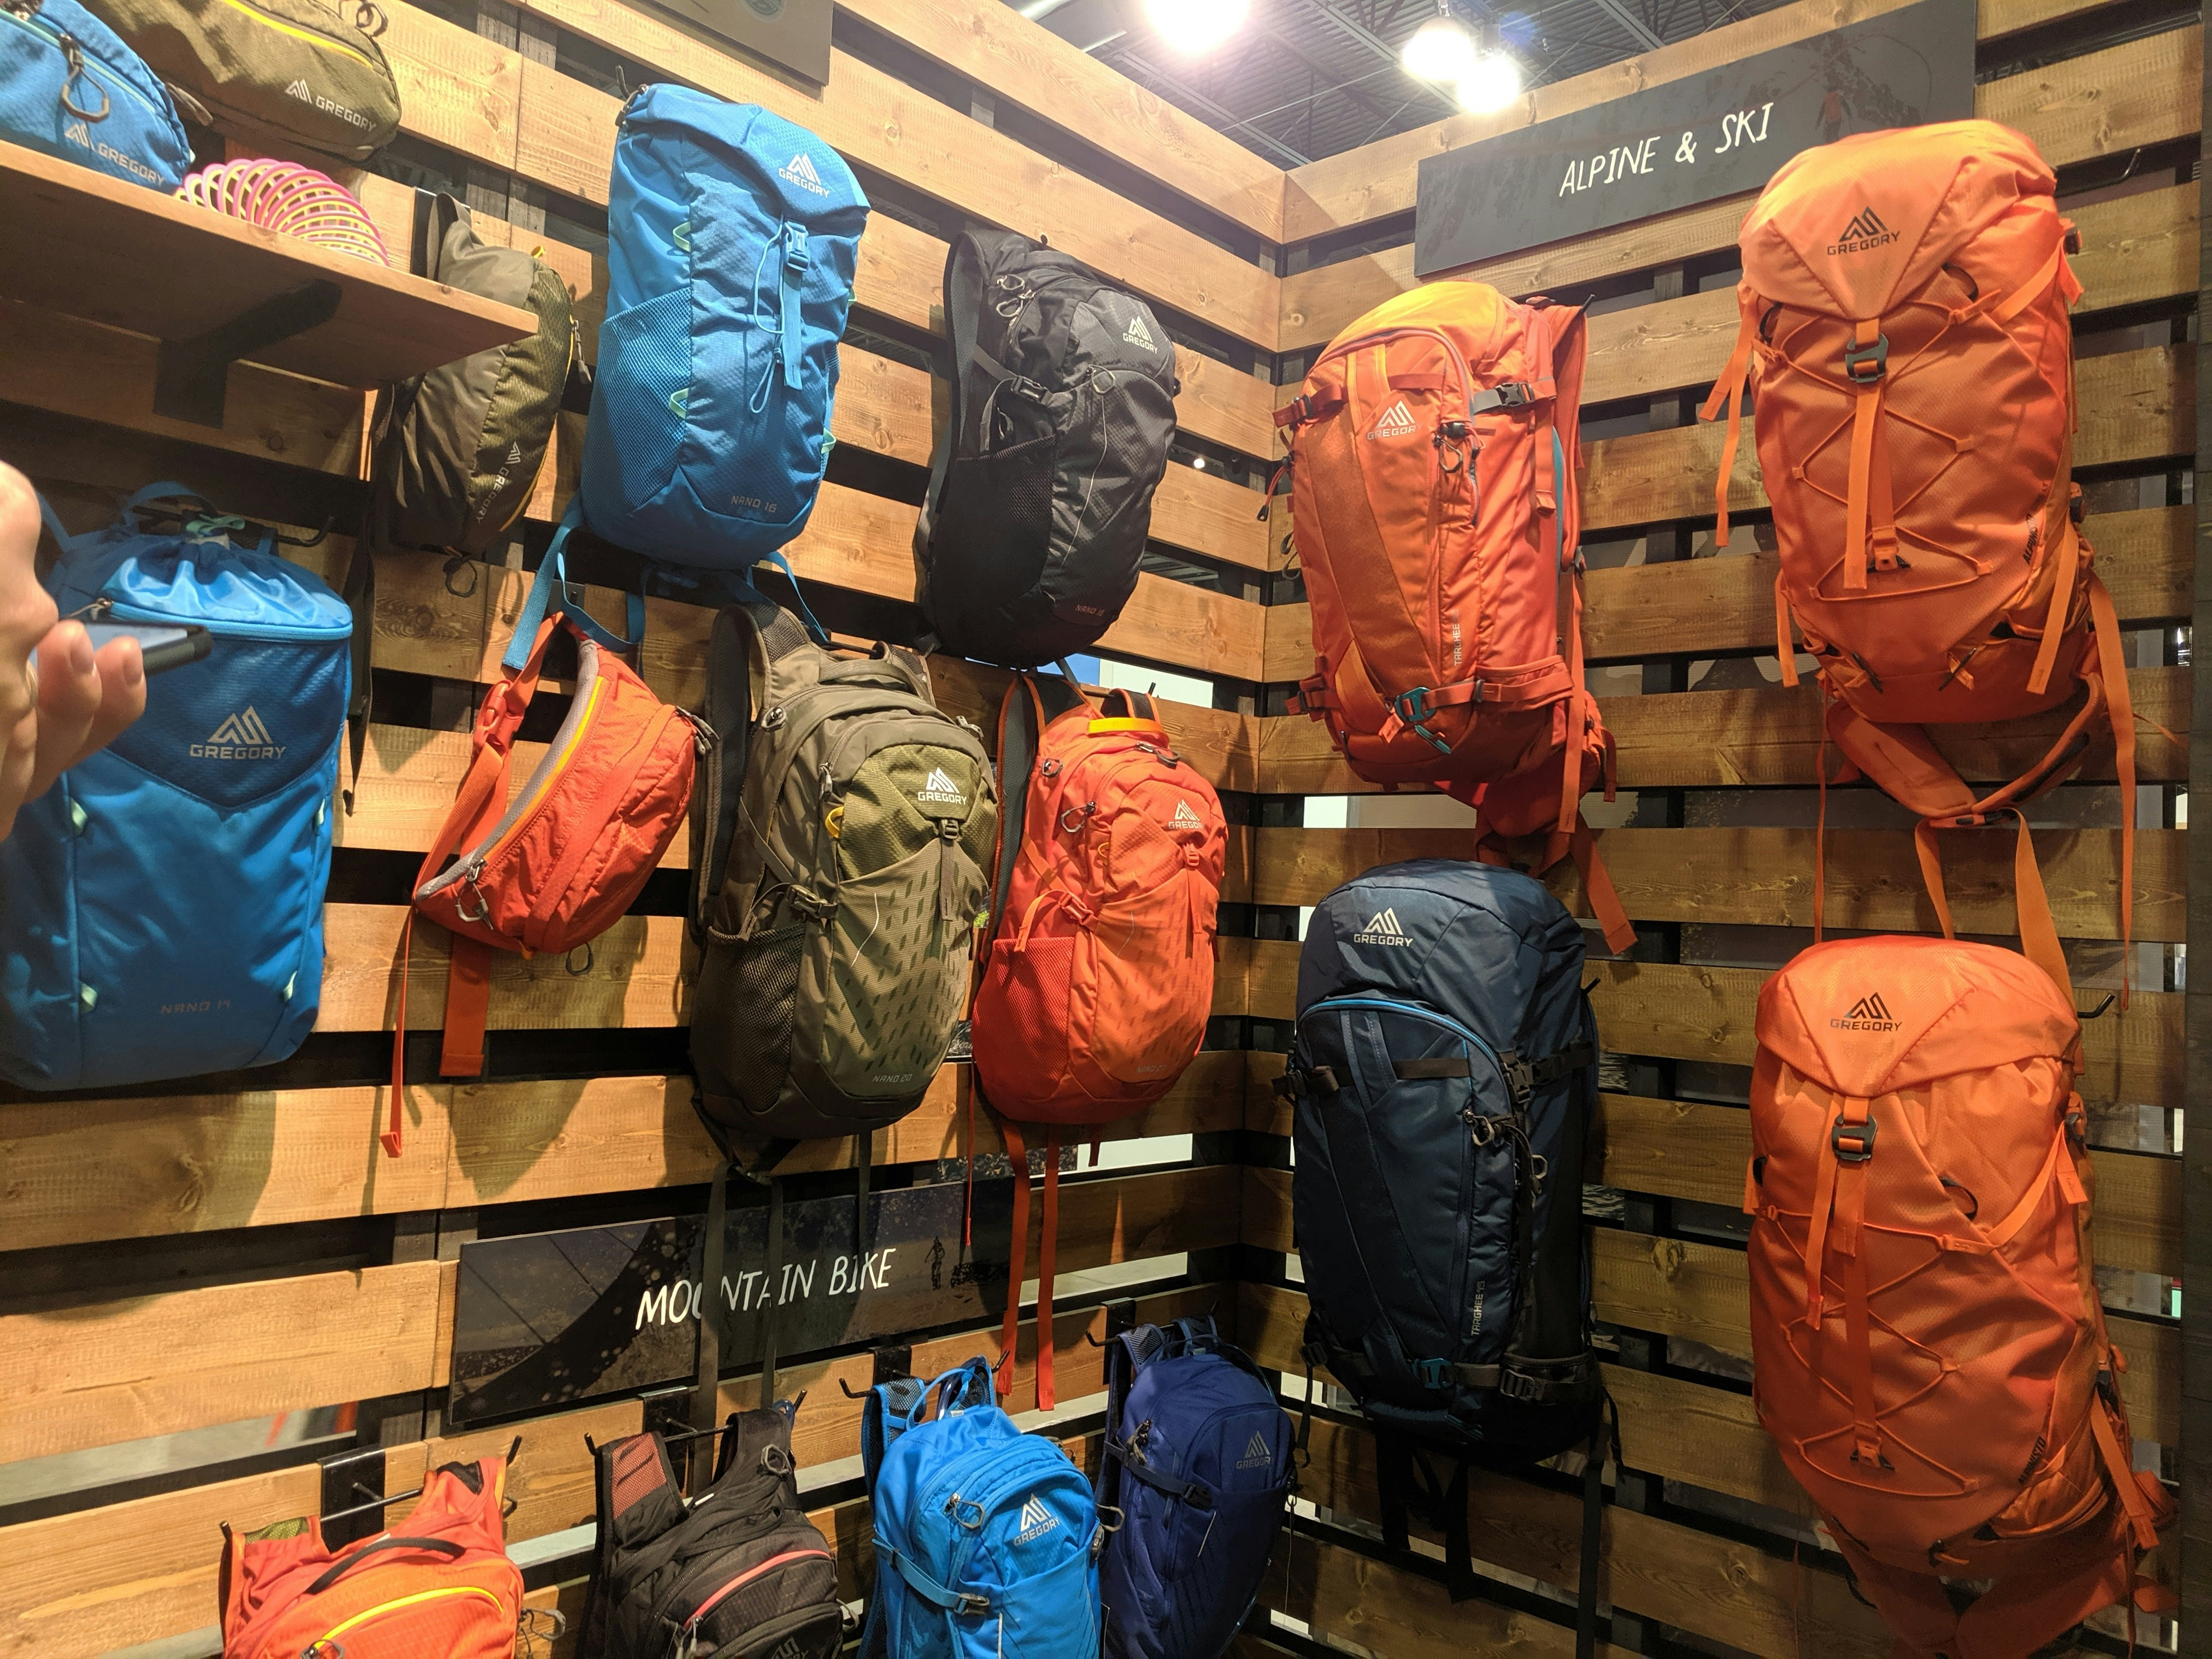 Brand new Gregory backpacks in orange, bright blue, olive, and black hang from a display wall made of warm wooden planks oriented horizontally at Outdoor Retailer Summer 2019